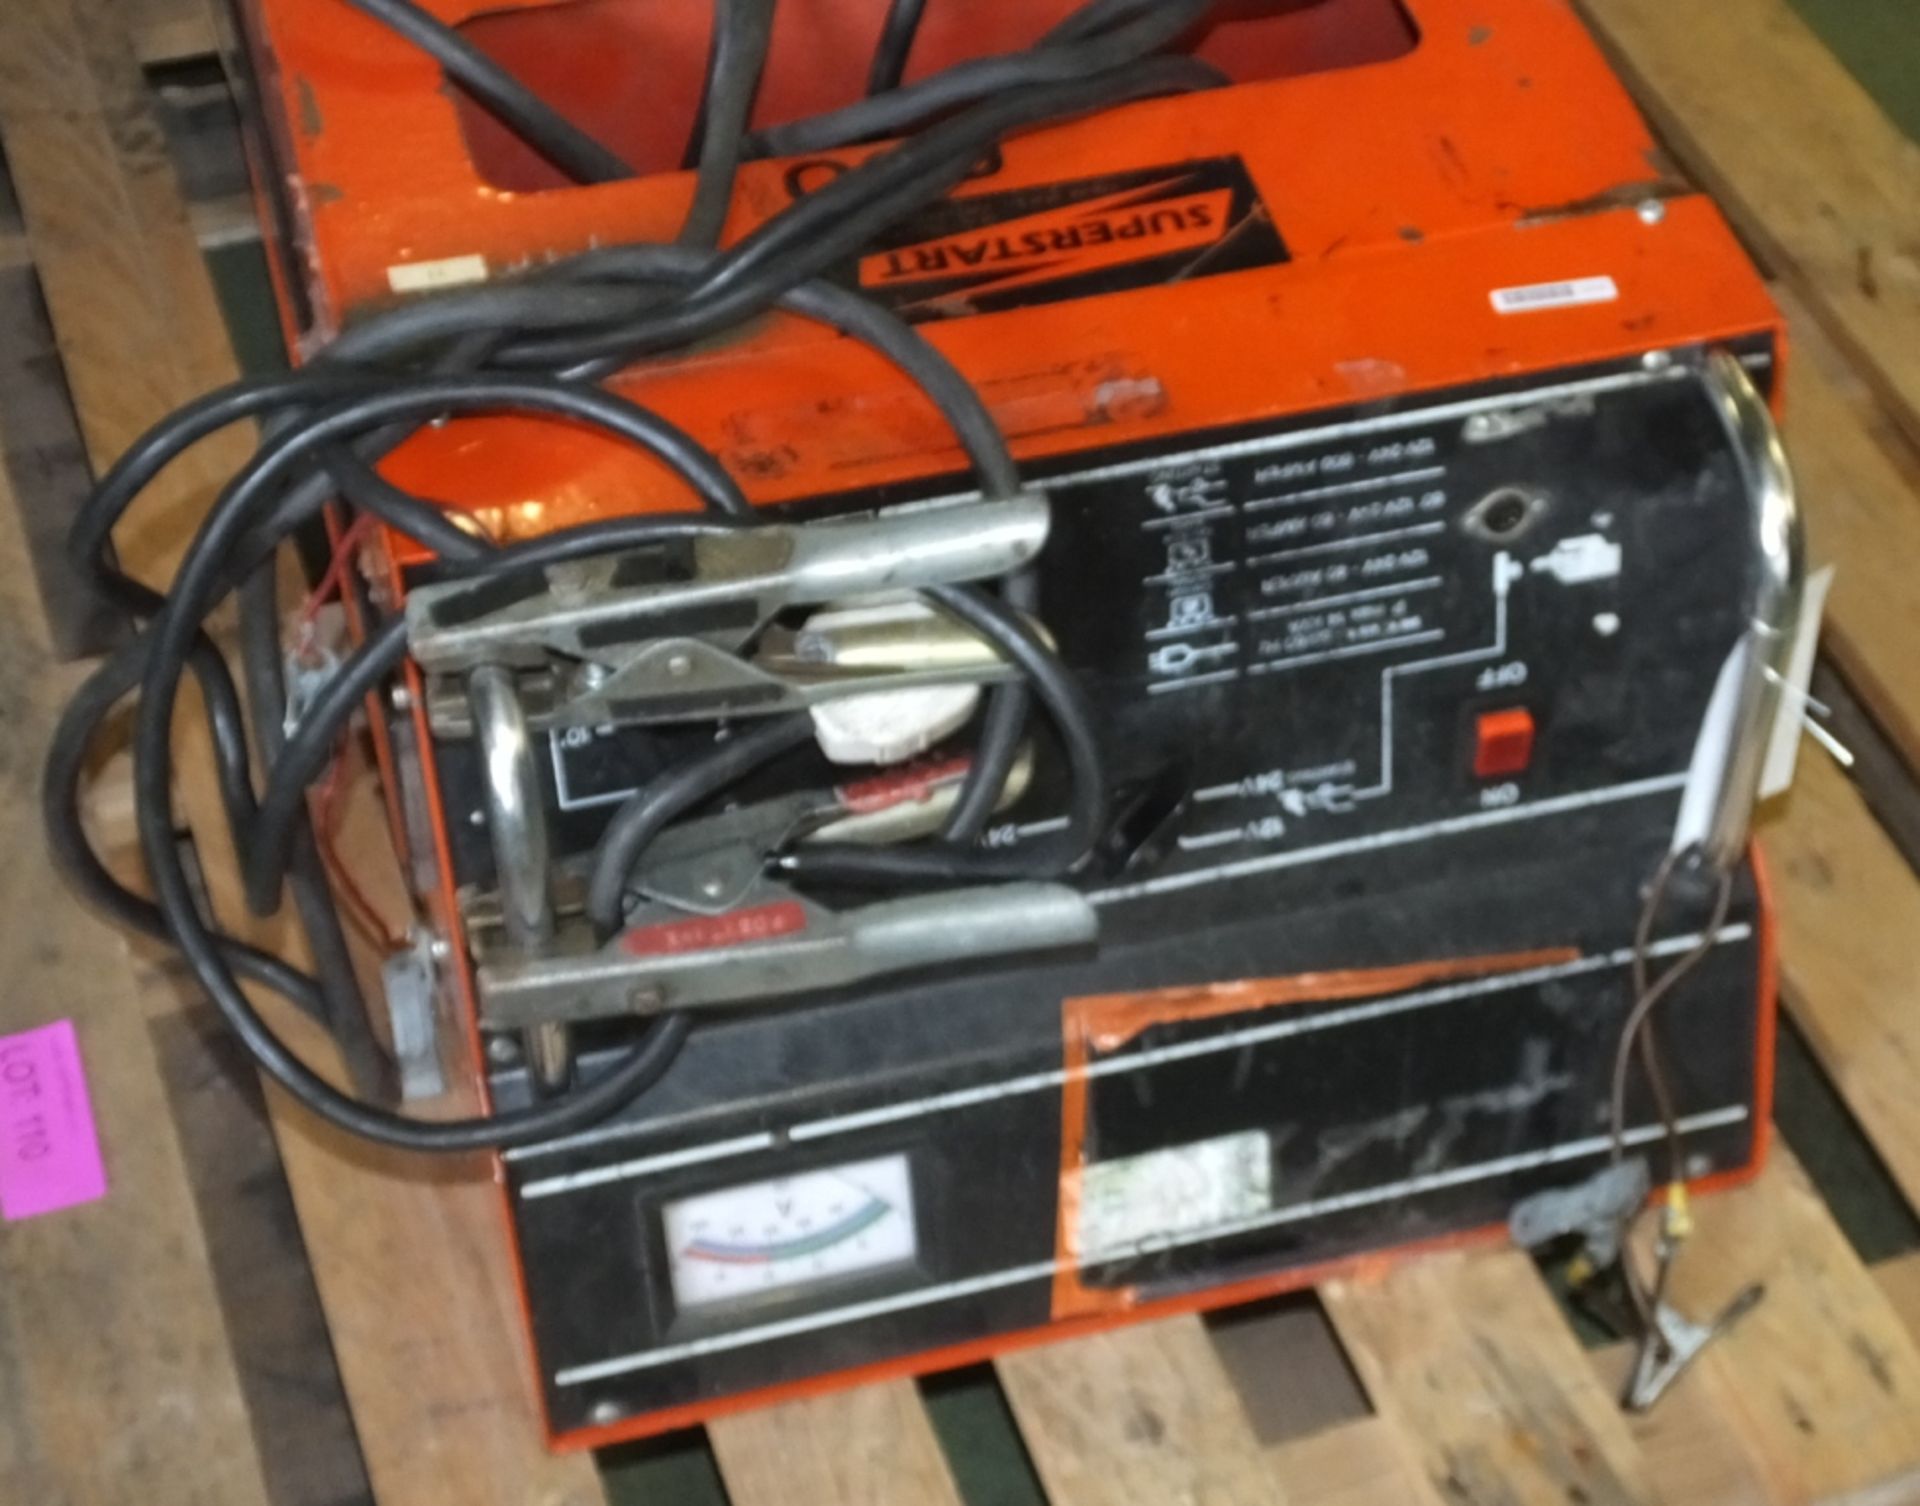 Sealey Superstart 600 Battery Charger - As spares - Image 2 of 2